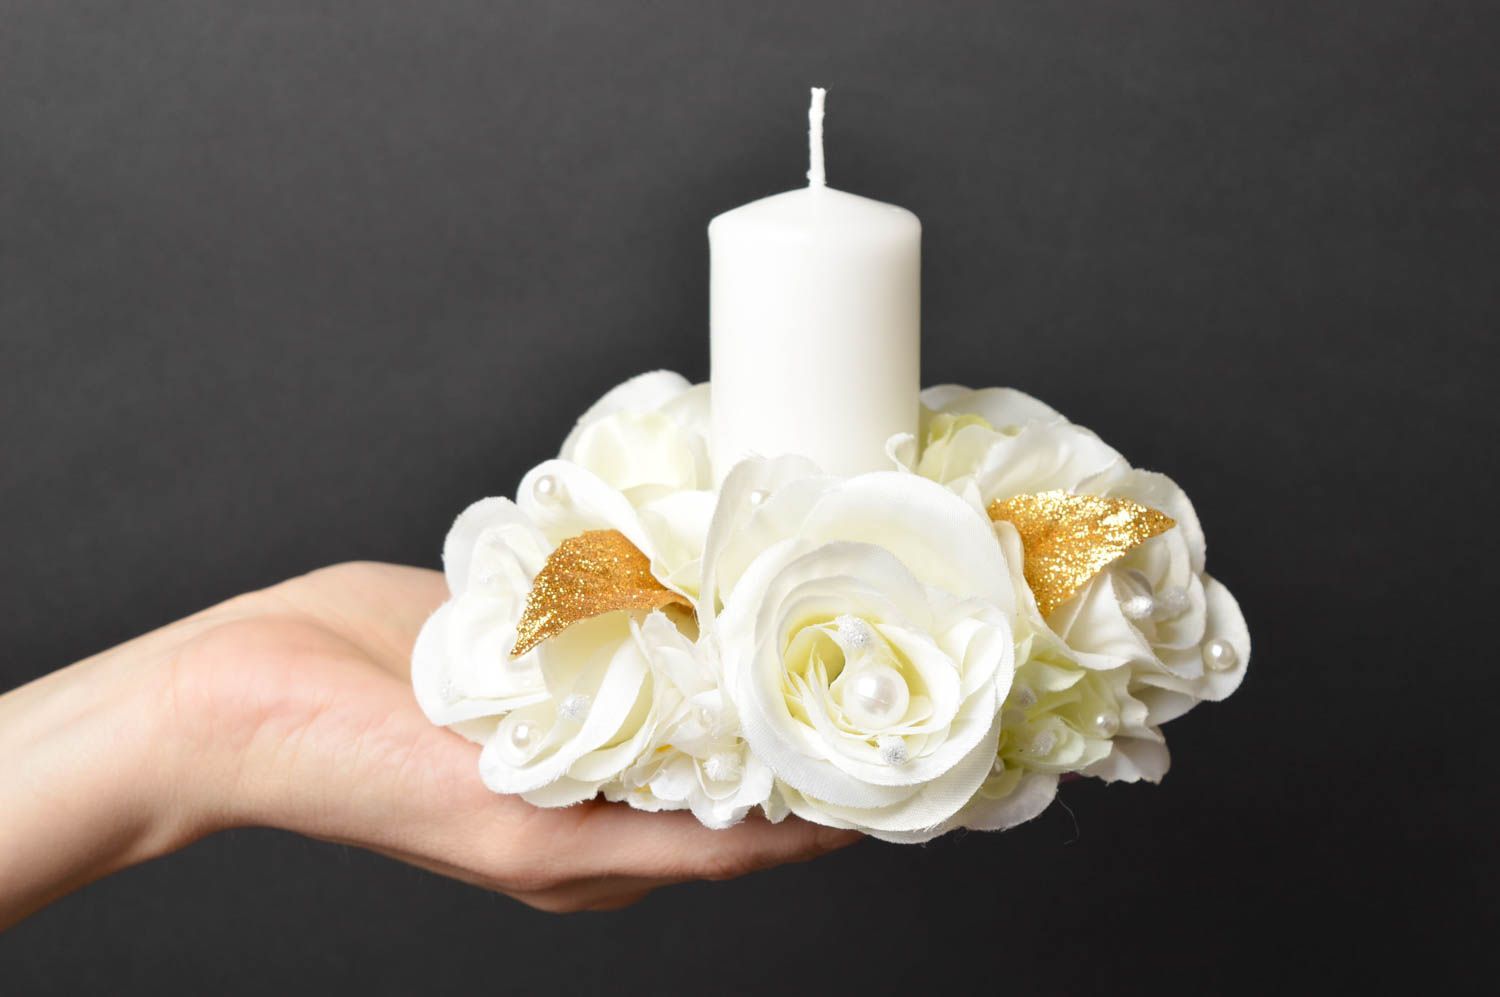 Handmade wedding candle unity candle best candles wedding accessories photo 5